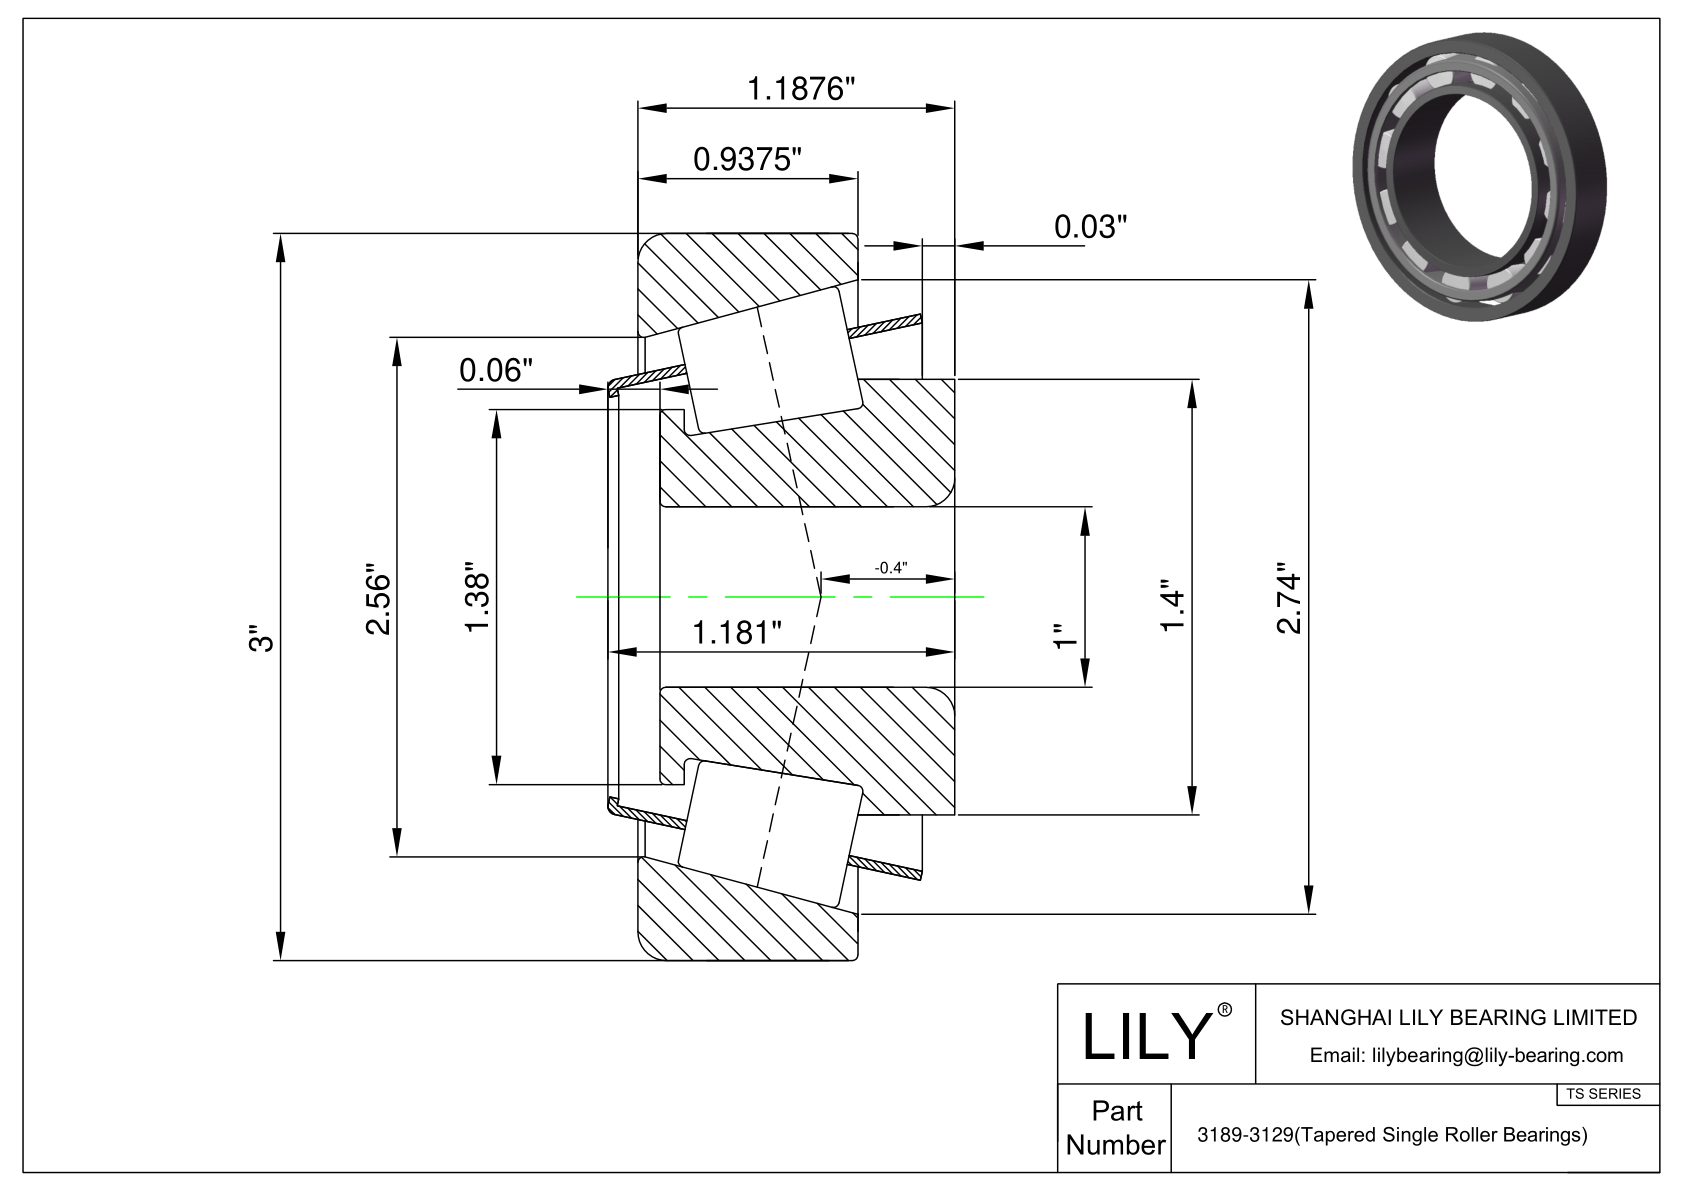 3189-3129 TS (Tapered Single Roller Bearings) (Imperial) cad drawing